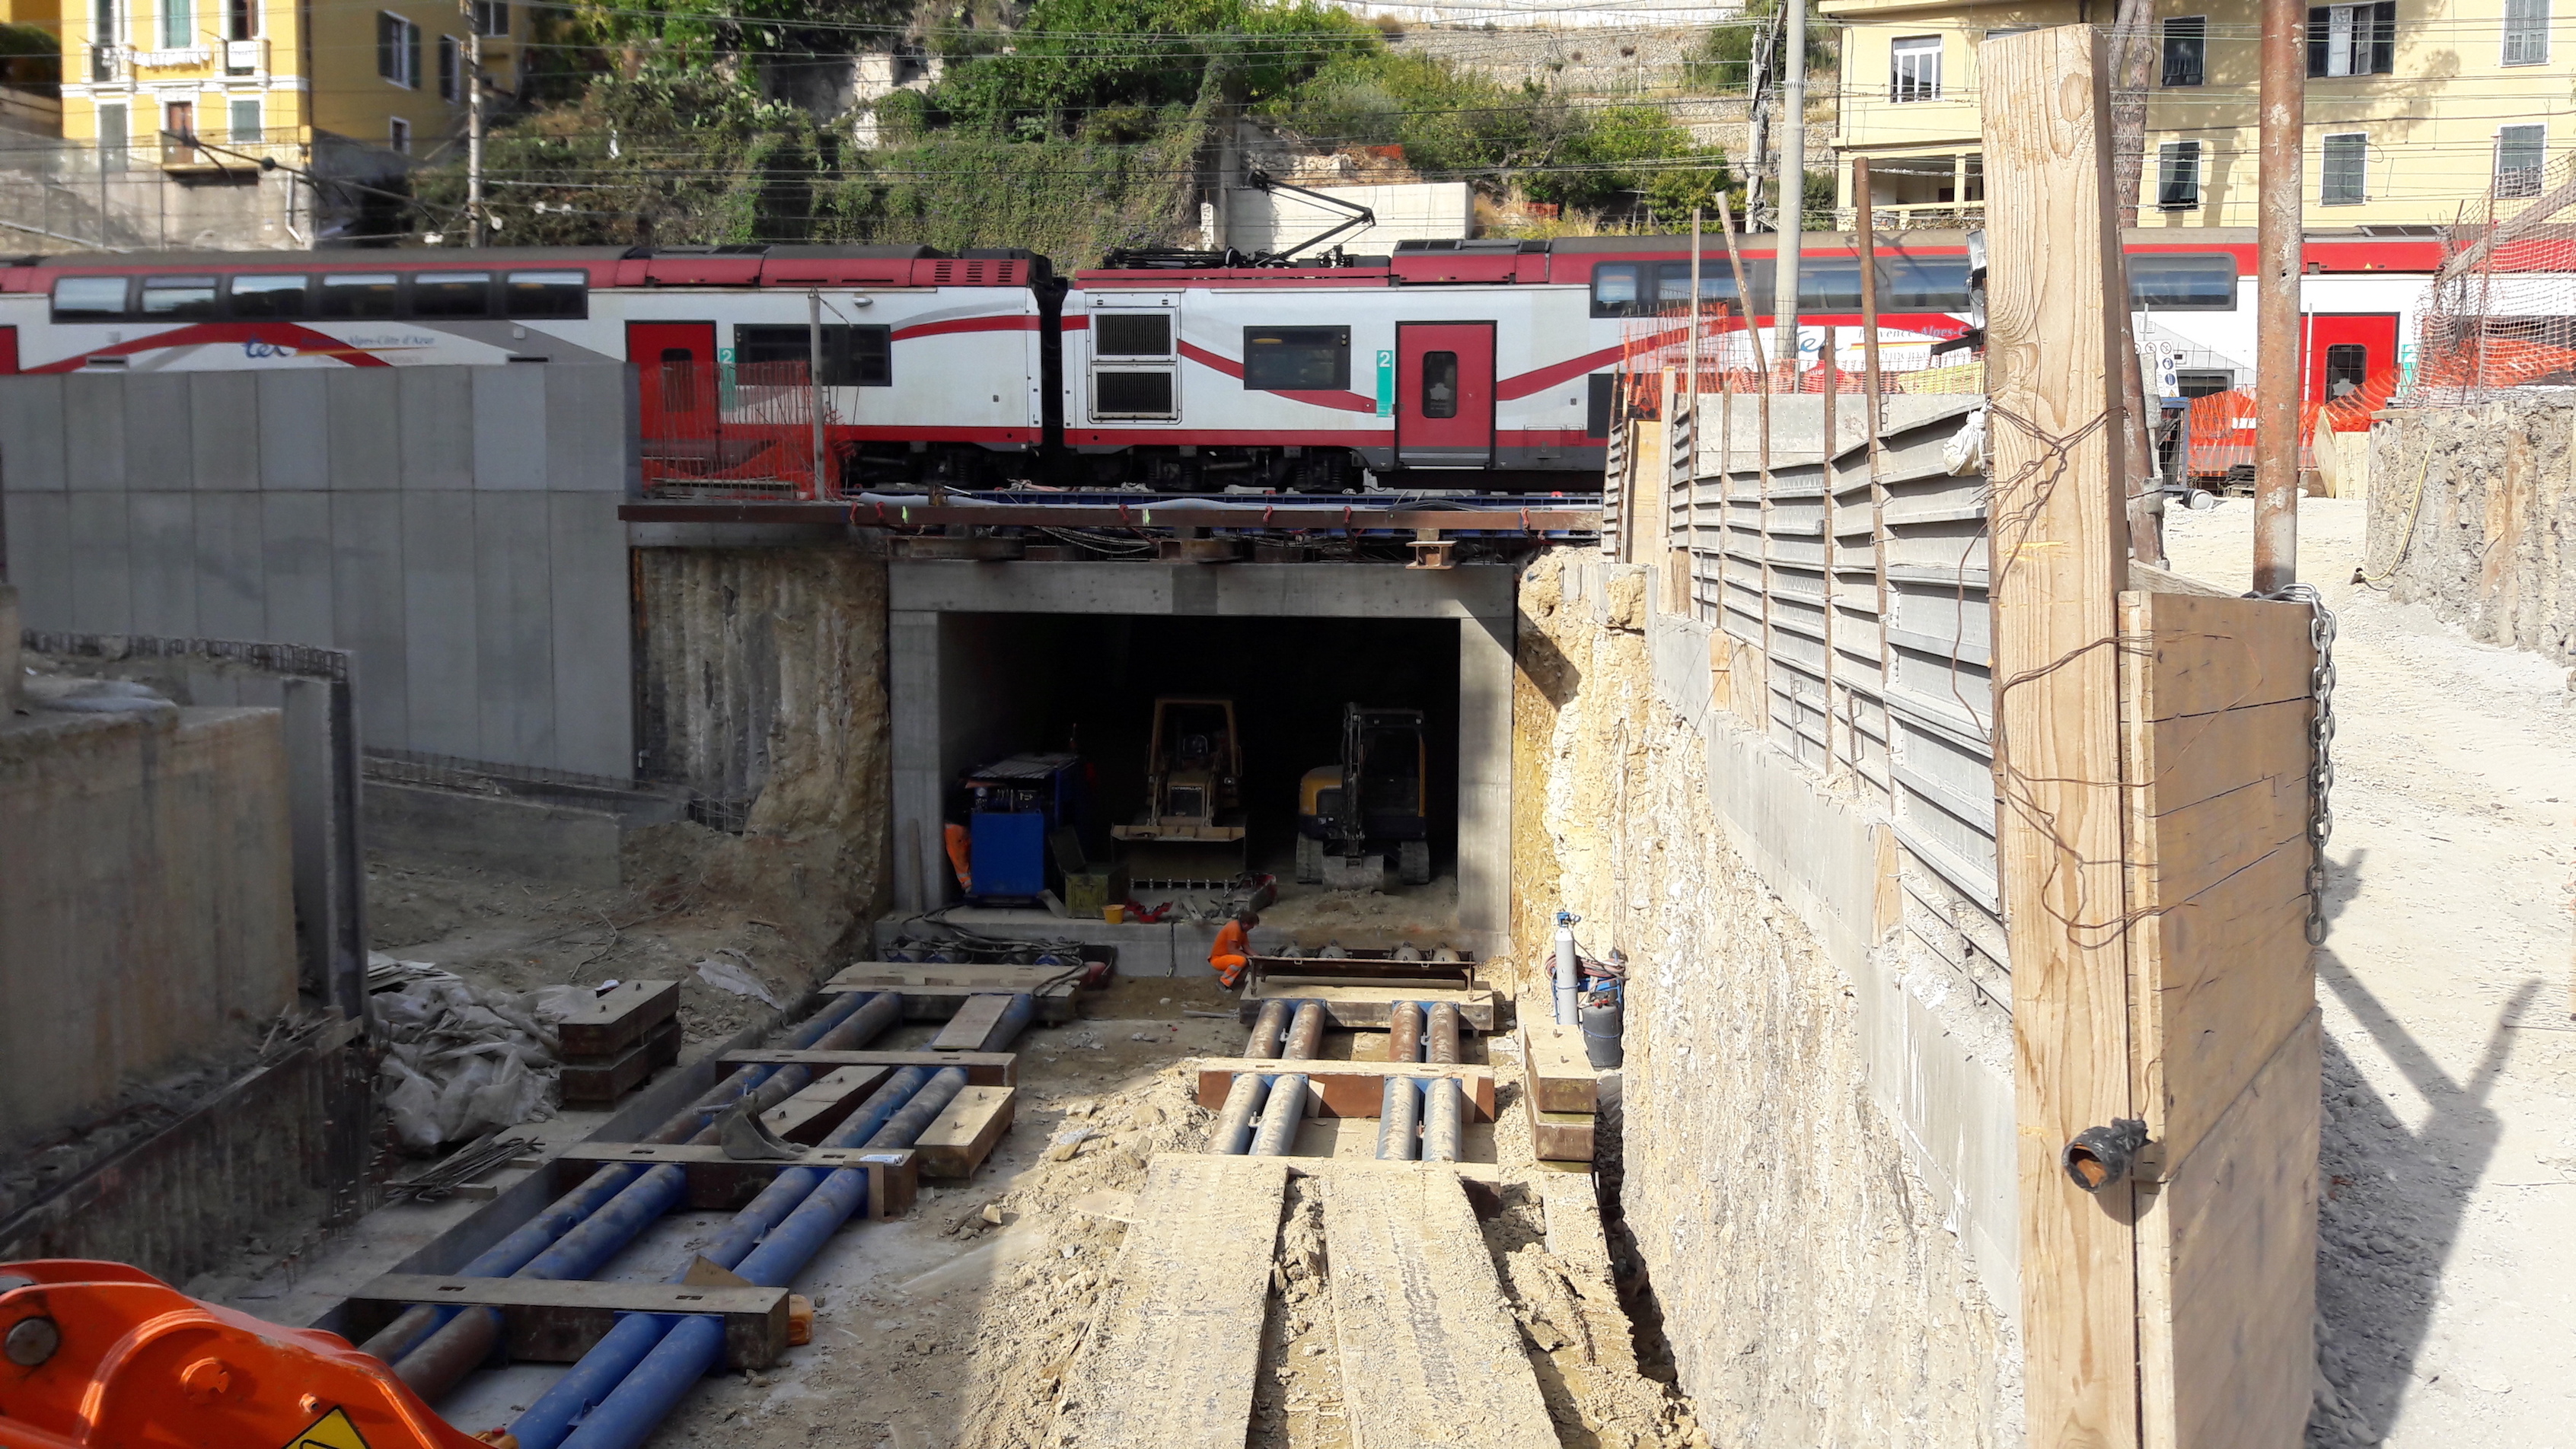 No delays, more durability: PENETRON ADMIX is added to the box-shaped concrete tunnel elements, which are then pushed into place underneath the Ventimiglia station railway tracks.